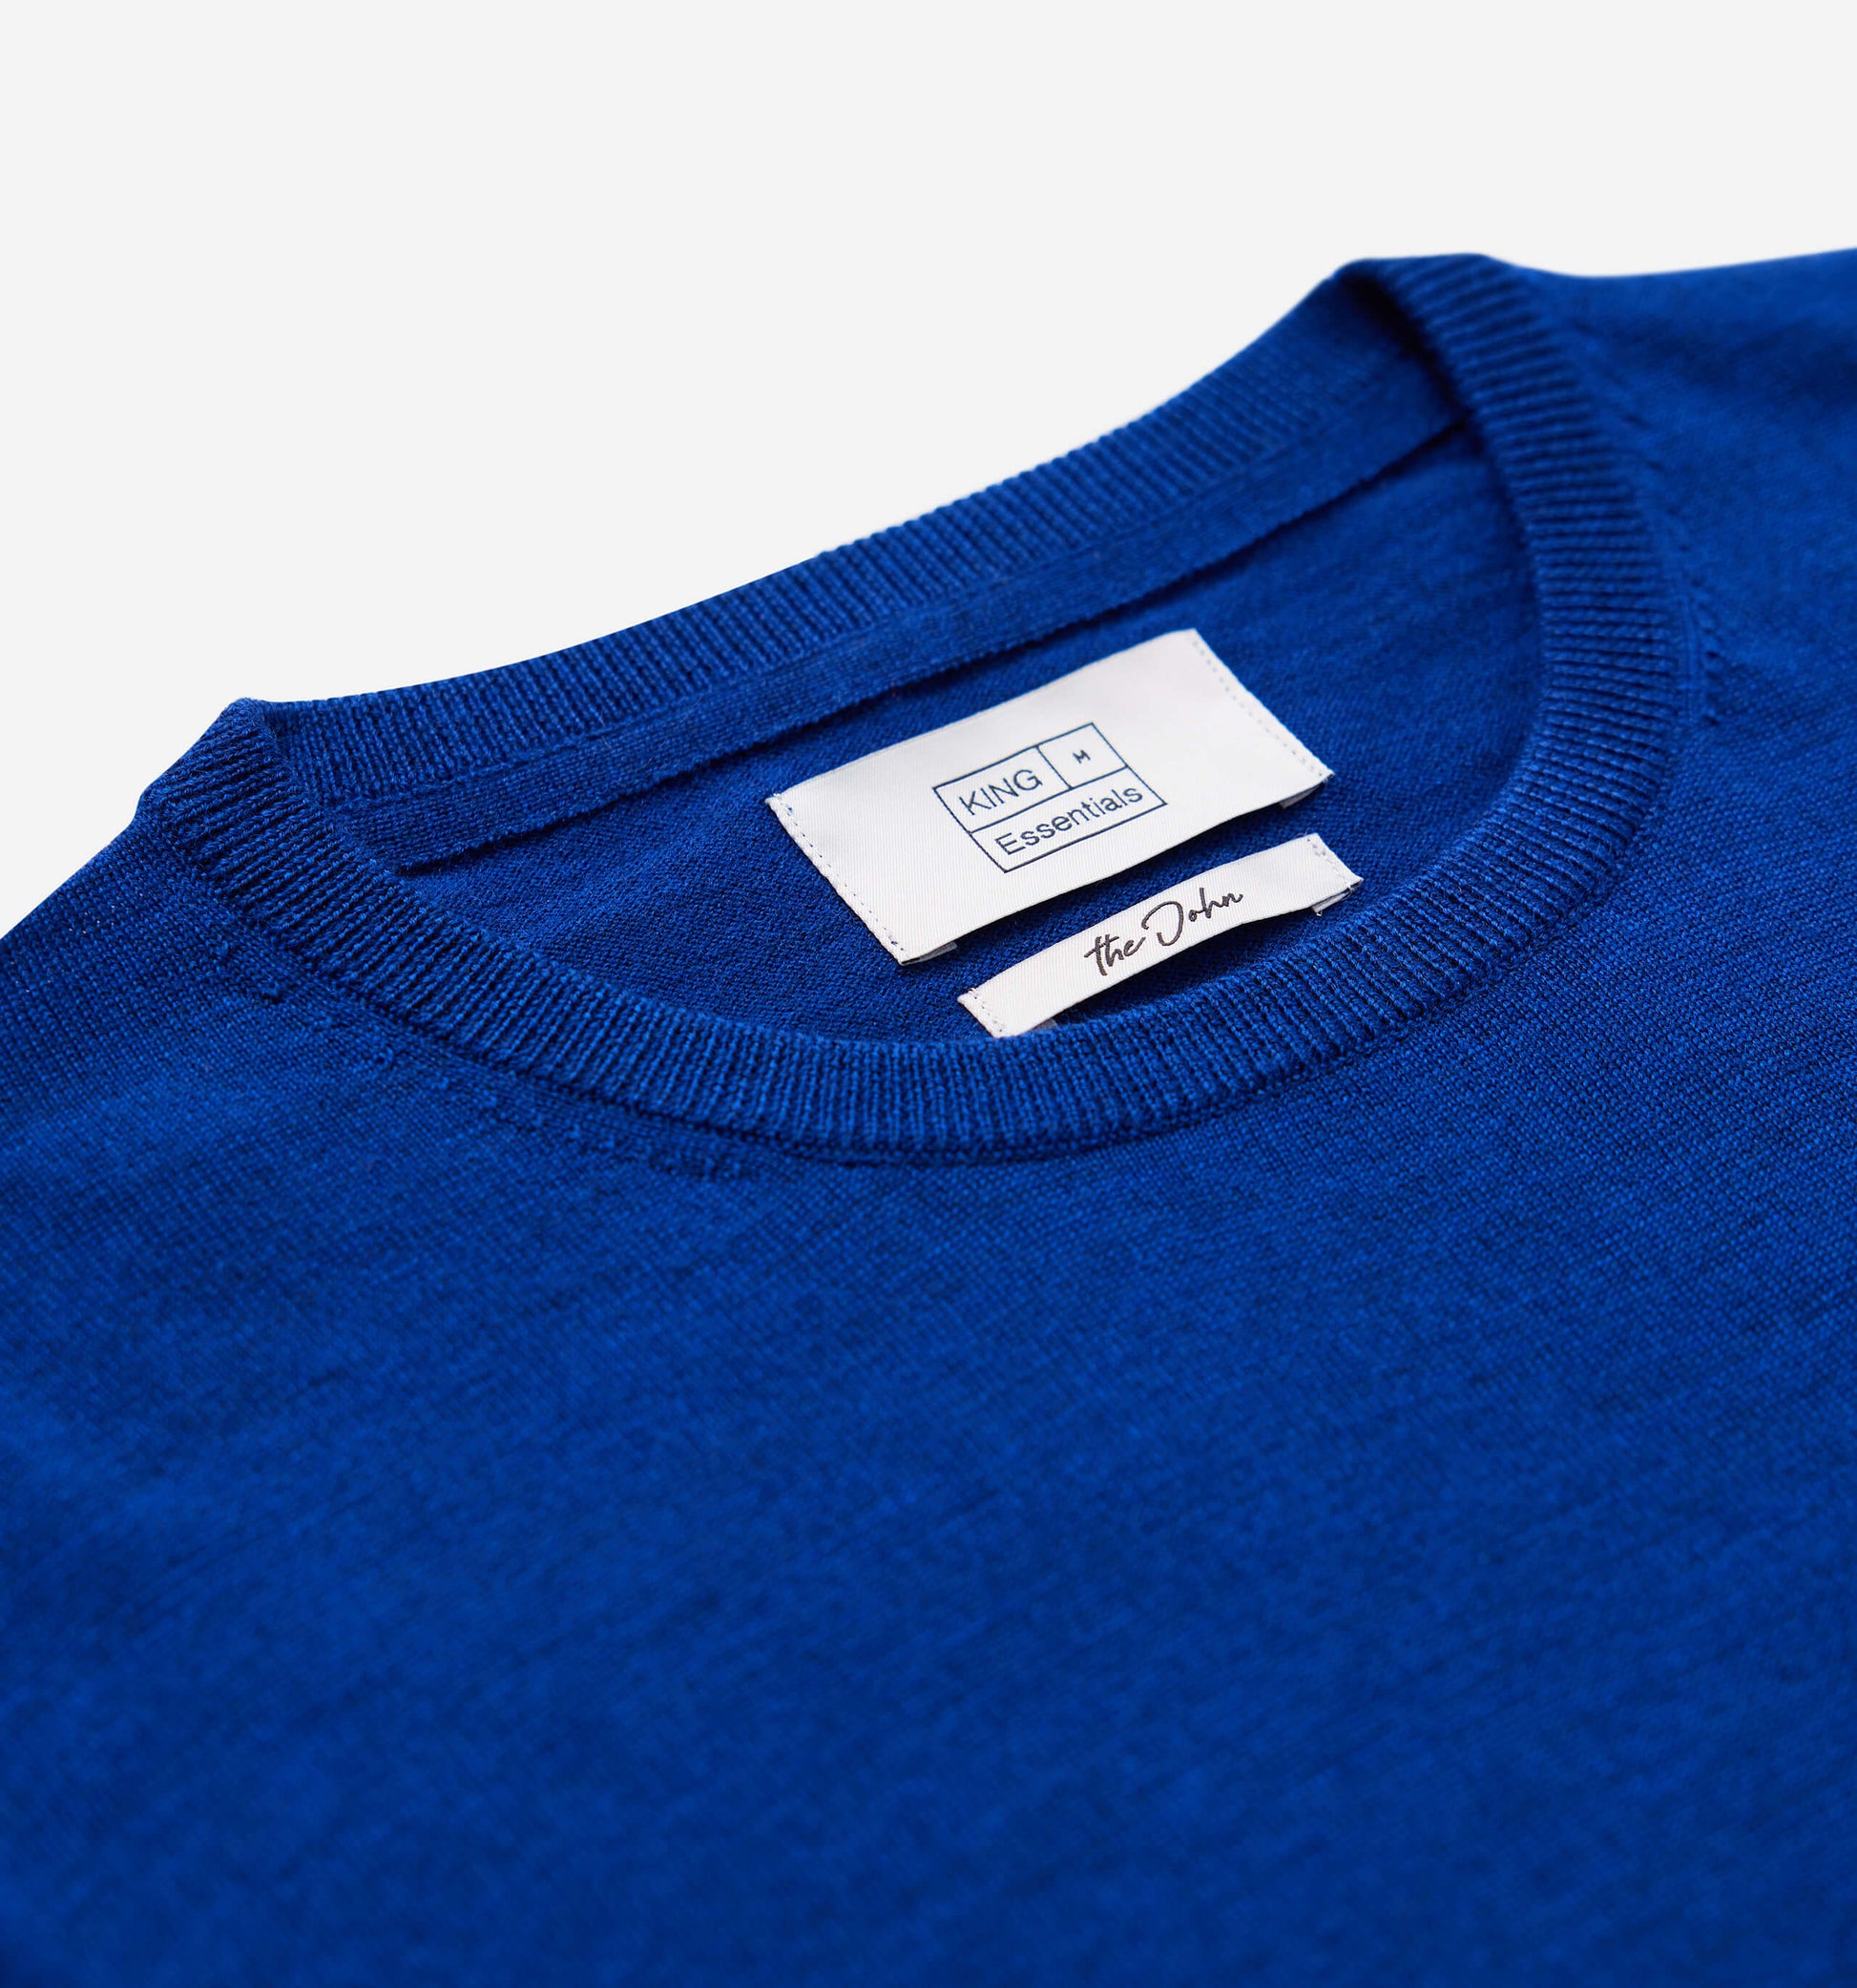 The John - Merino Wool Crewneck In Royal Blue From King Essentials